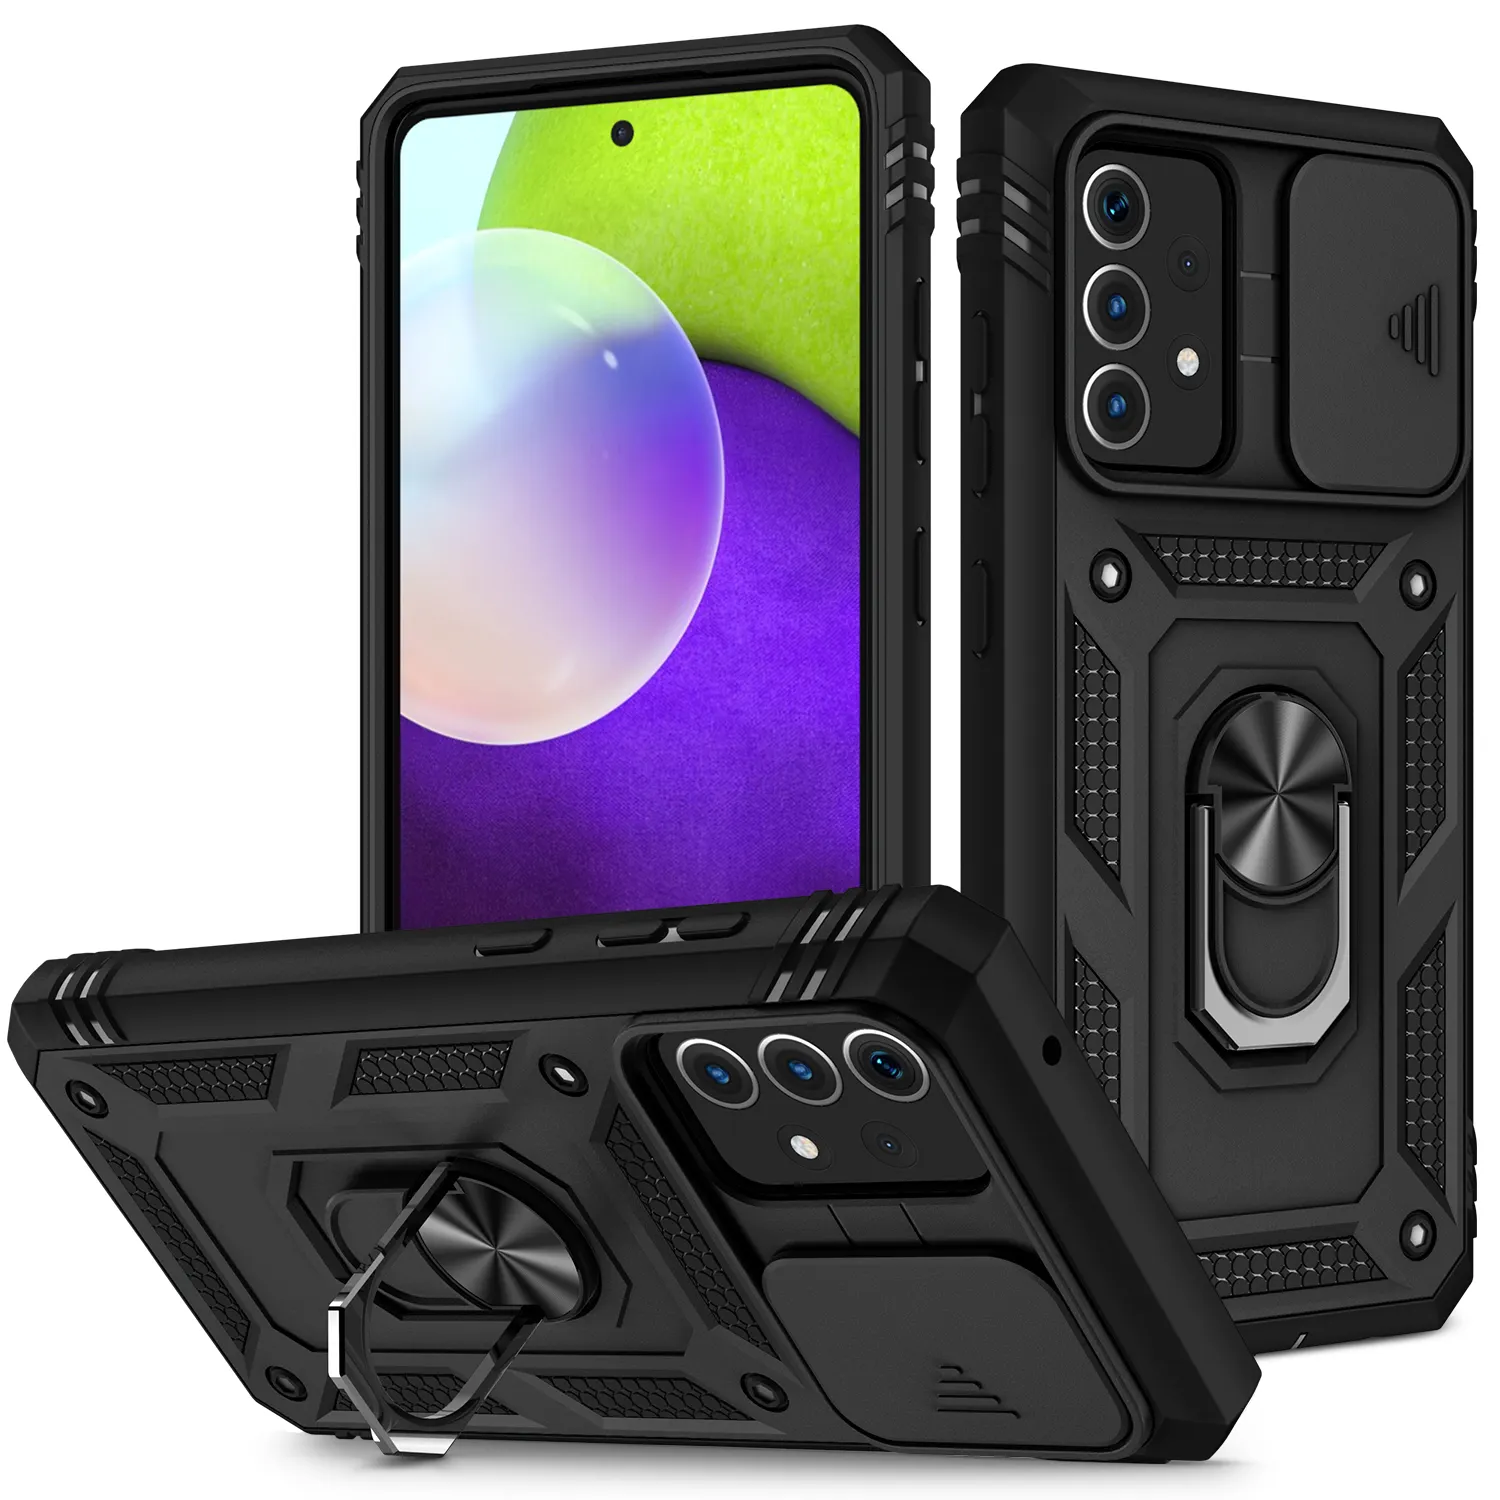 Leyi selling 360 all inclusive lens protection phone covers with stand shockproof phone case for Motorola G Stylus